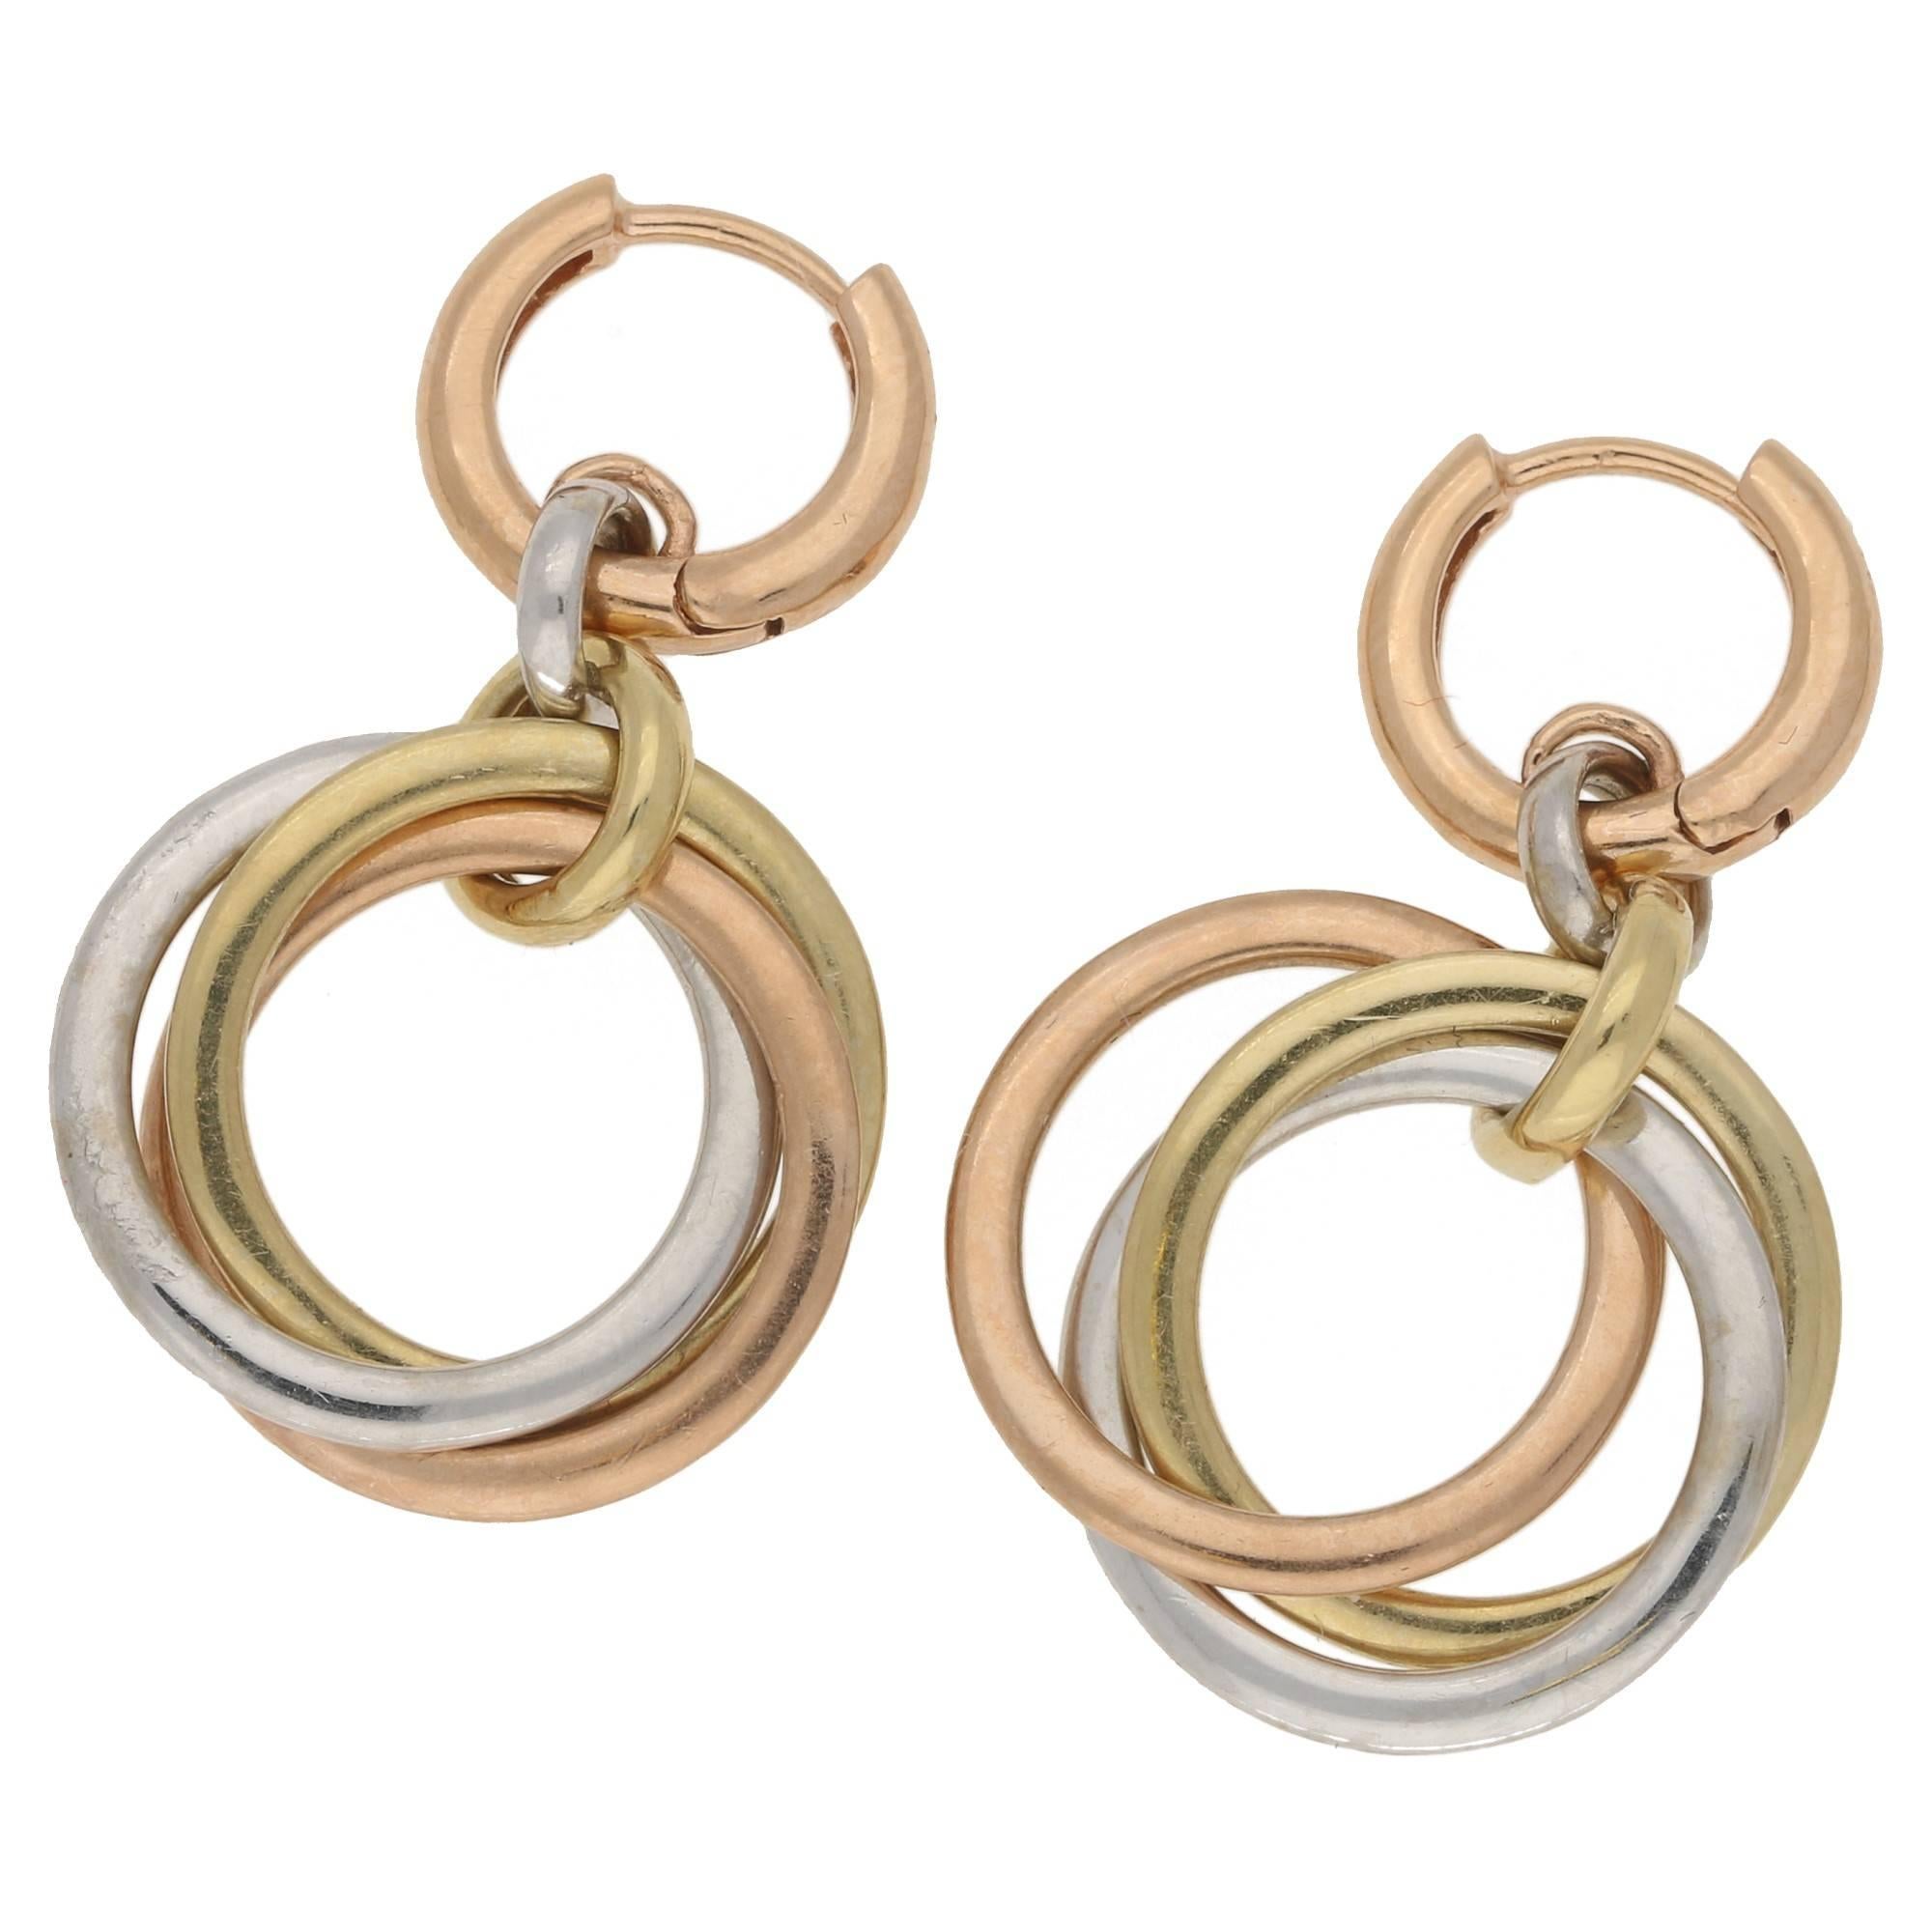 A wonderful pair of diamond set tri-coloured 14ct gold circlet earrings. Each earring consists of three gold circlets hanging intertwined from a yellow gold bale connected to a white gold bale terminating in a rose gold hinged full hoop with